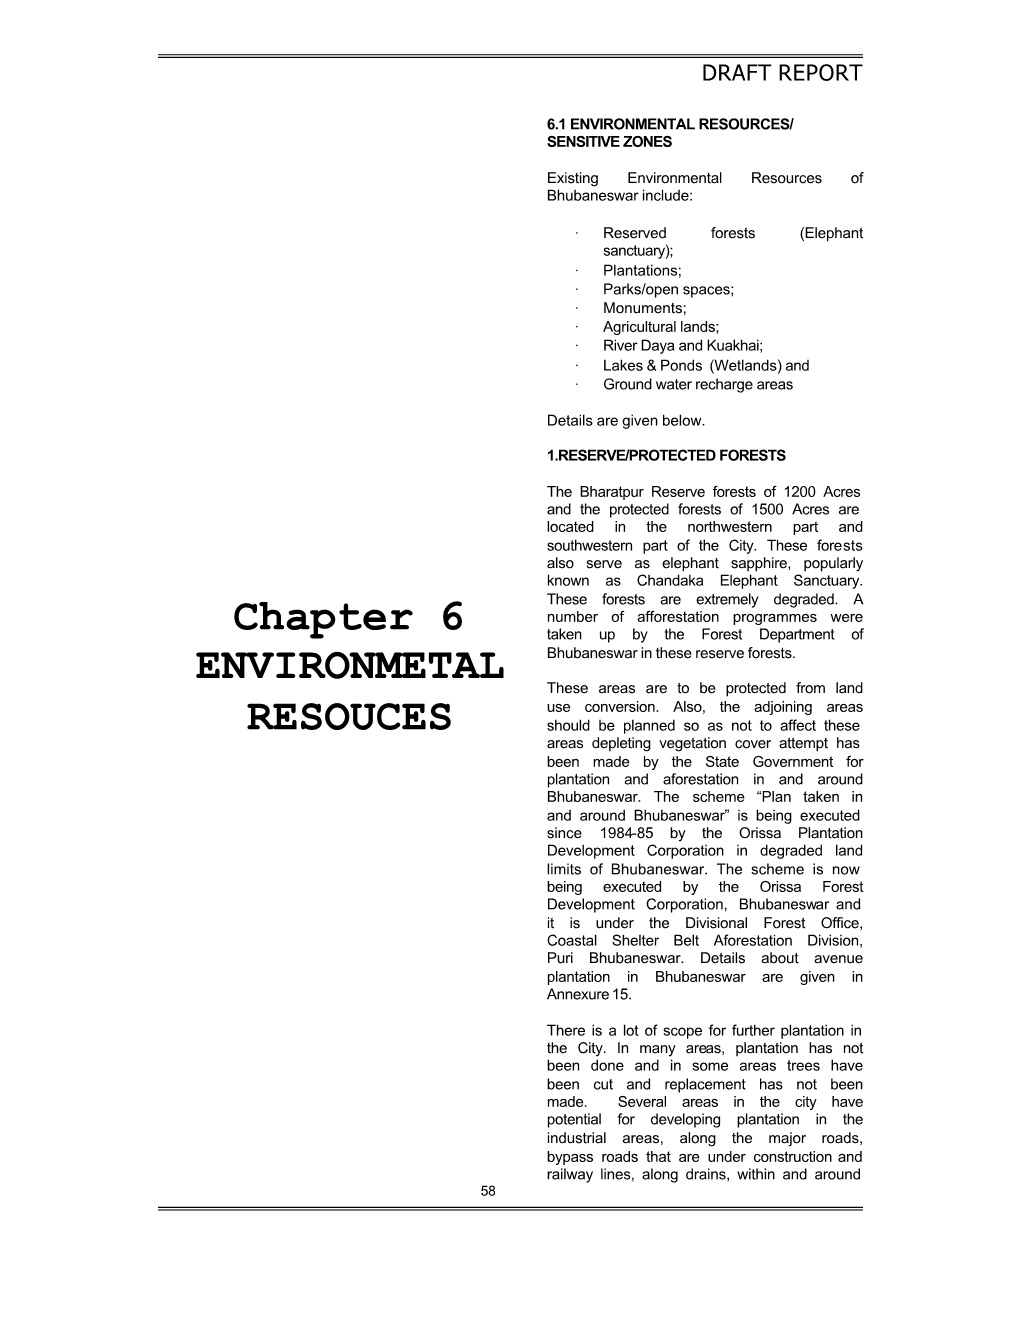 Chapter 6 Environmental Resources -New